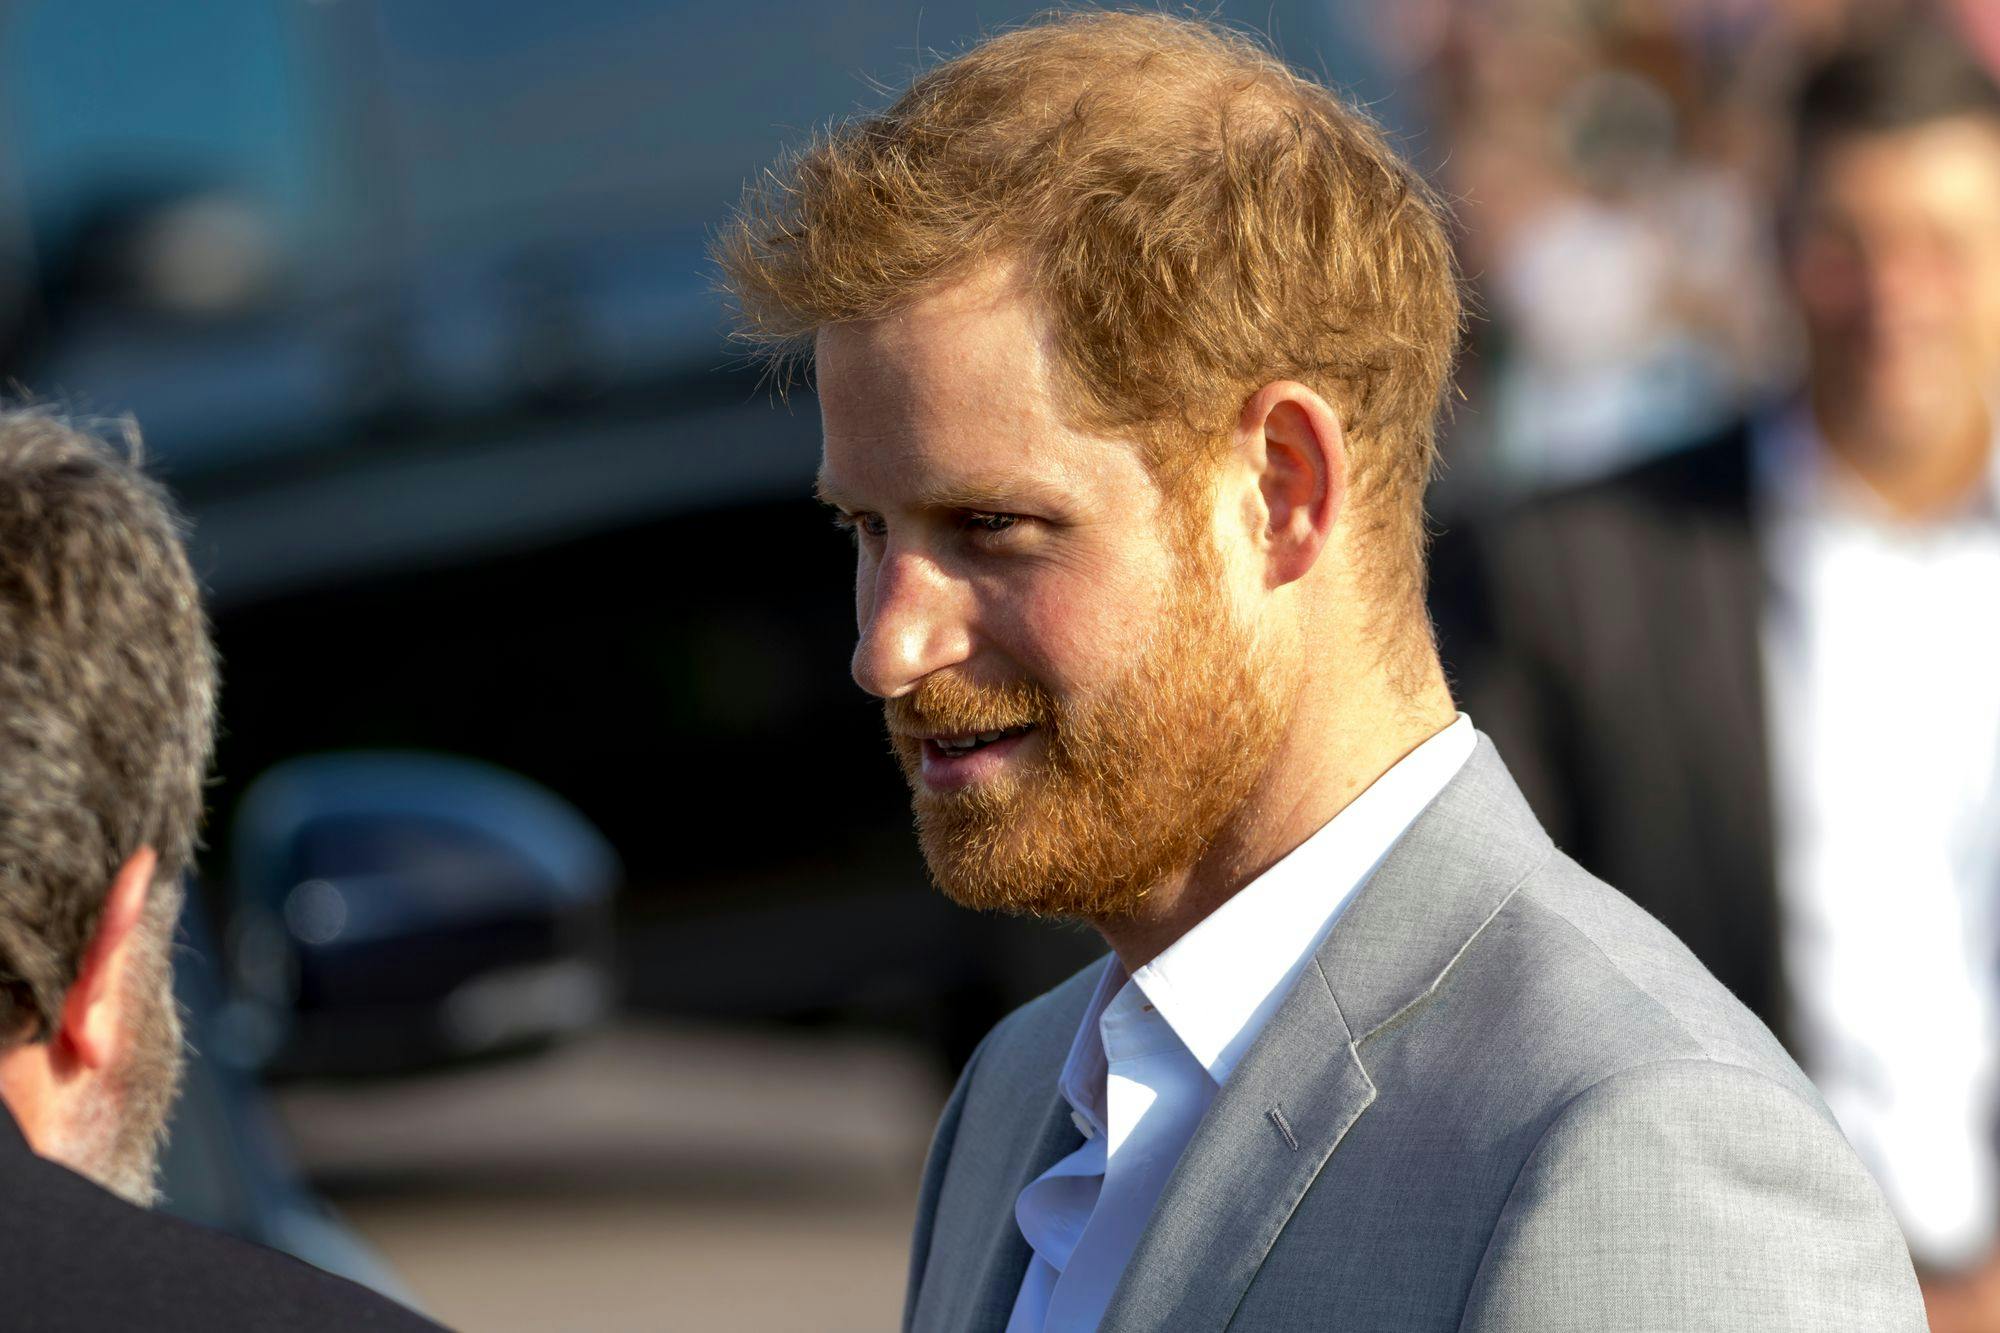 “You Must Not Silently Suffer” - Prince Harry Speaks Out On Mental Health In Remote Regions